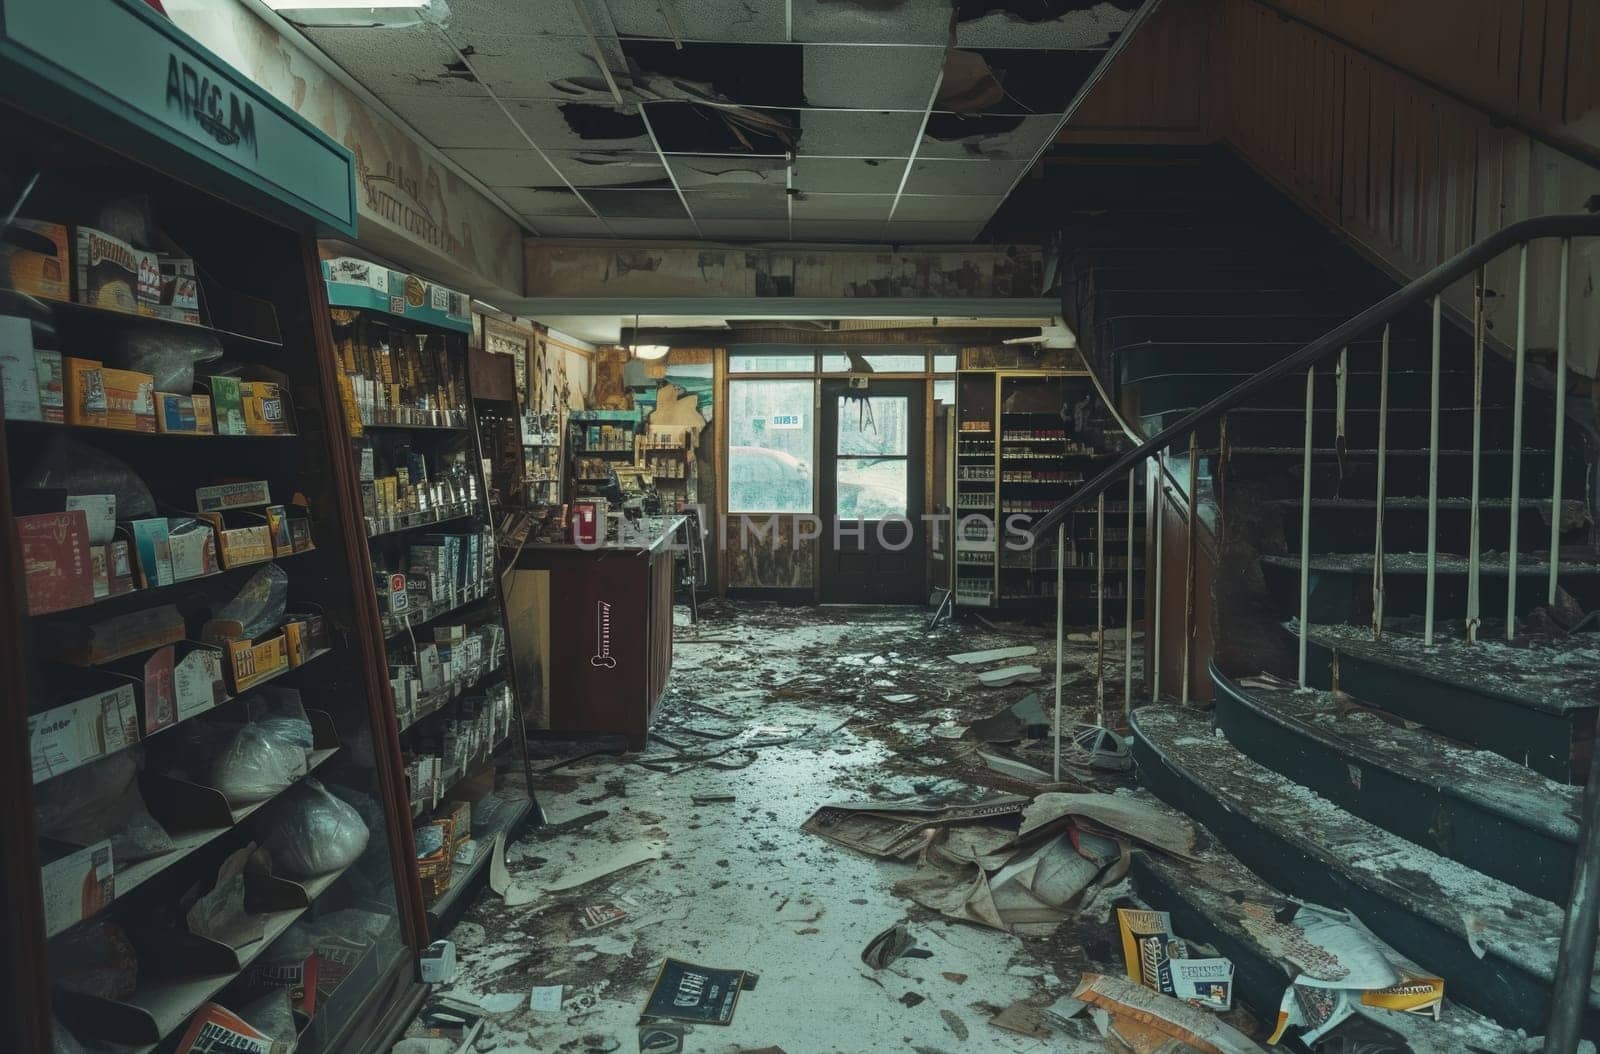 A once-bustling store lies abandoned, its products still on shelves, enveloped by the quiet aftermath of neglect and the passage of time